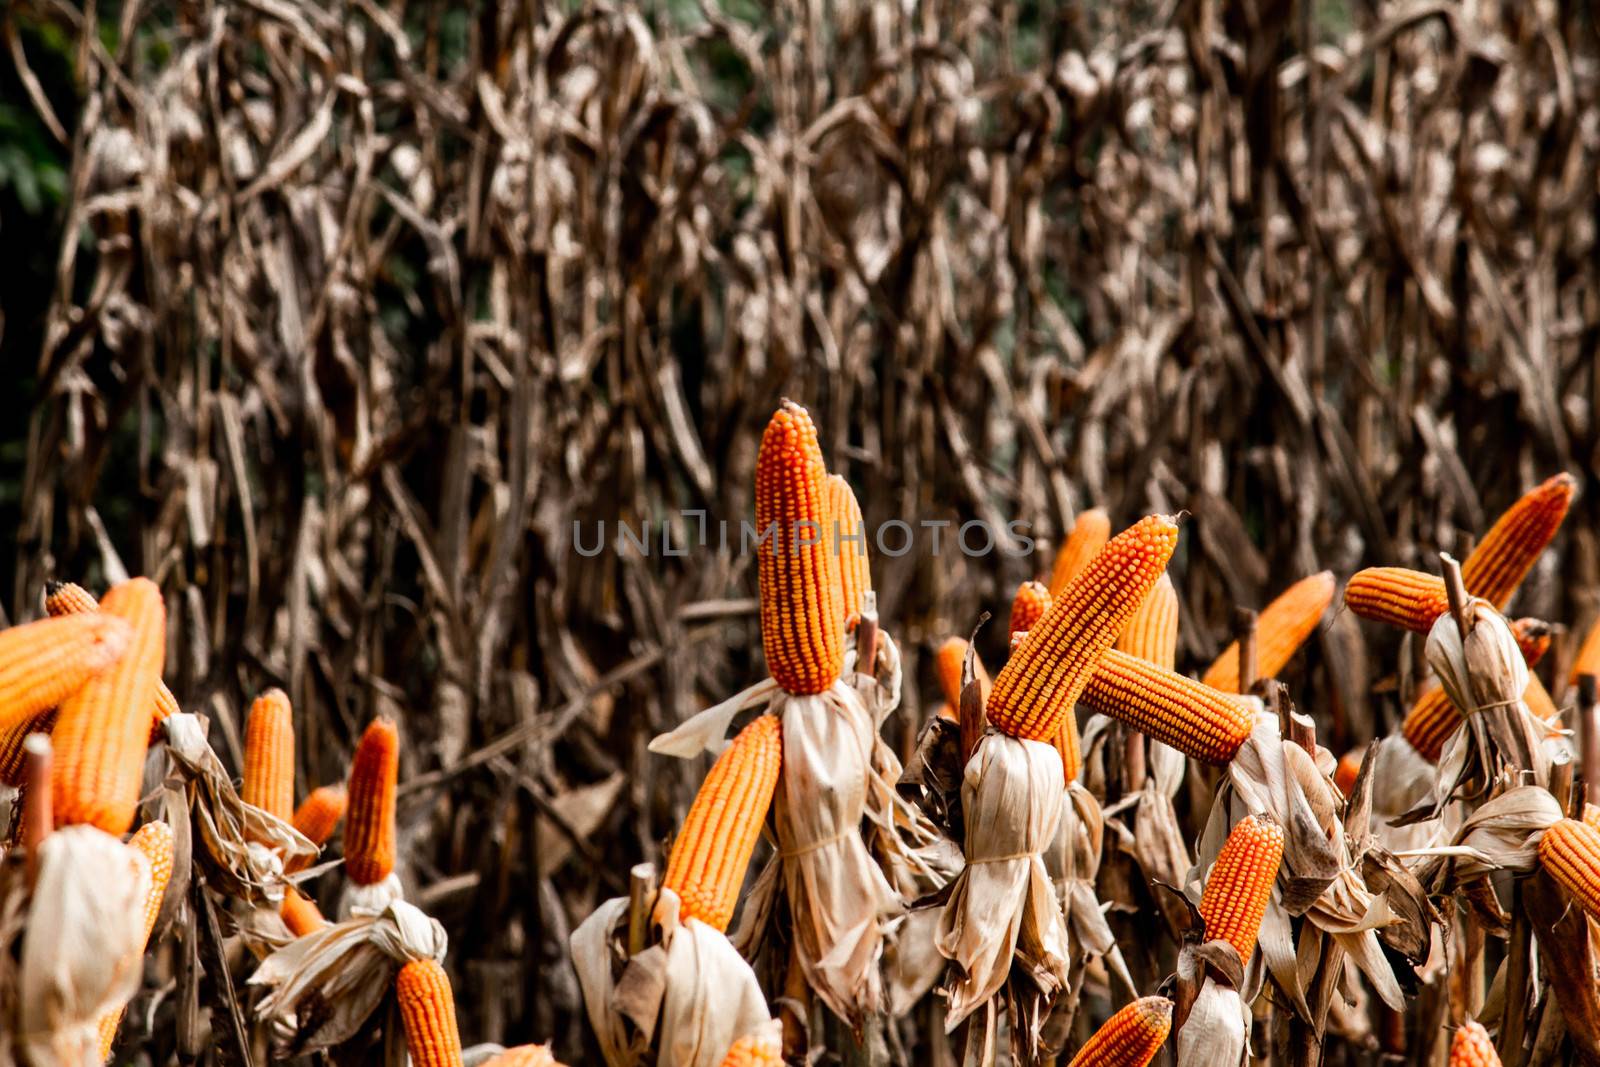 Dry corn cob with mature yellow corn growing ready for harvest i by TEERASAK